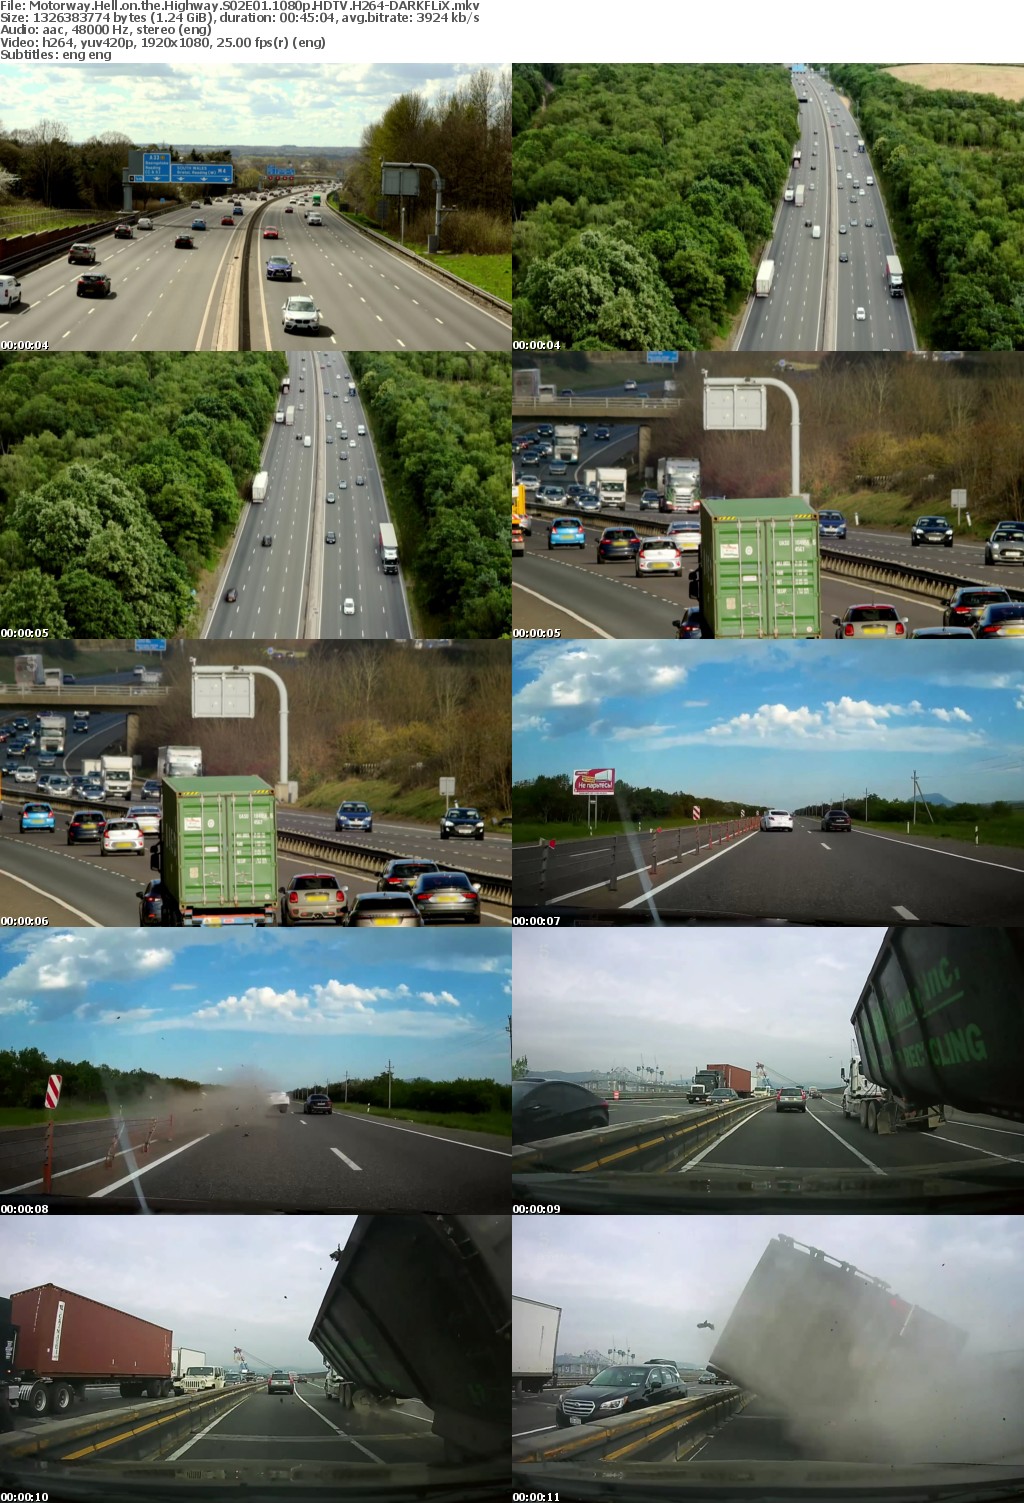 Motorway Hell on the Highway S02E01 1080p HDTV H264-DARKFLiX